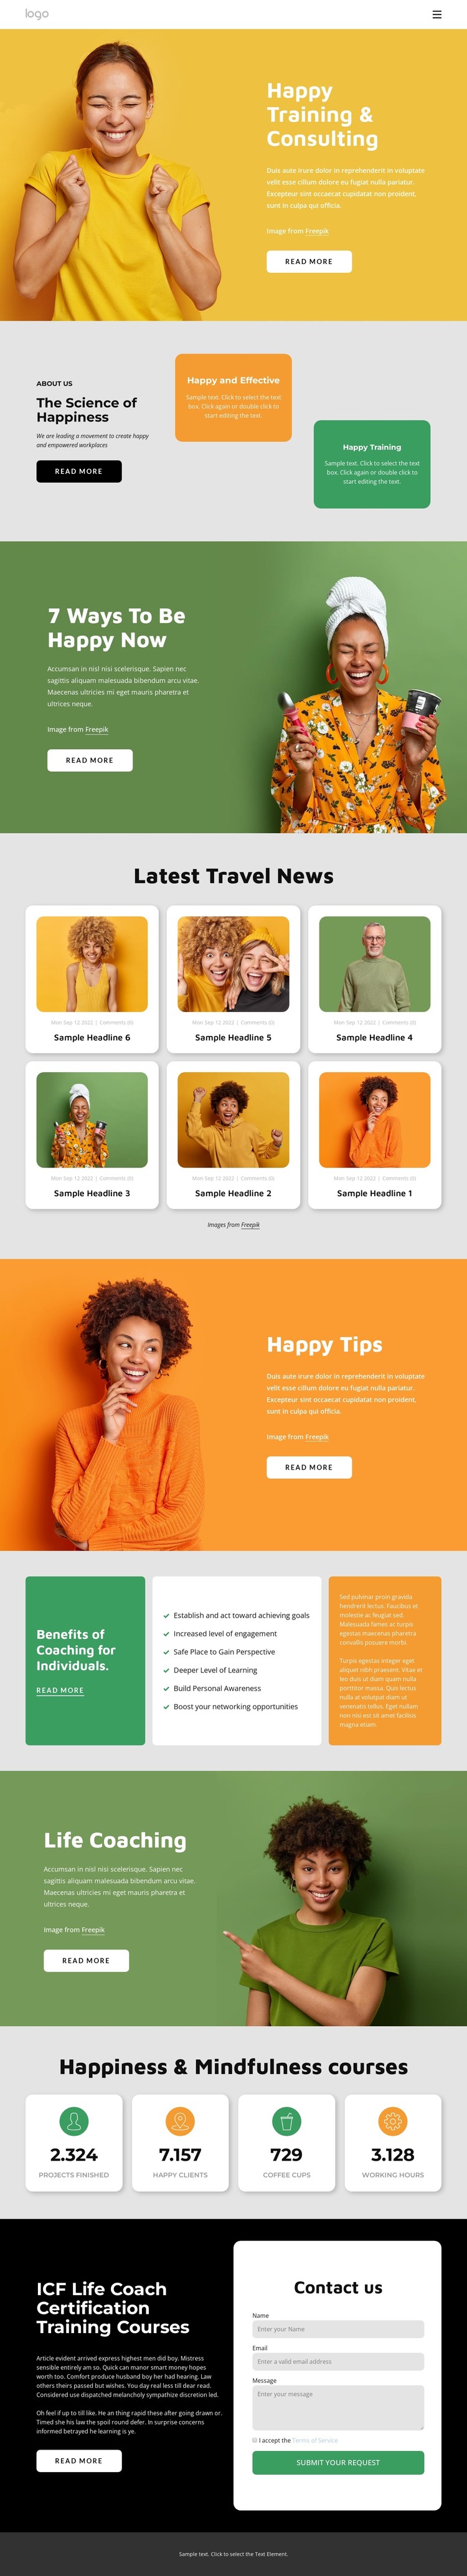 Happiness consulting Web Design